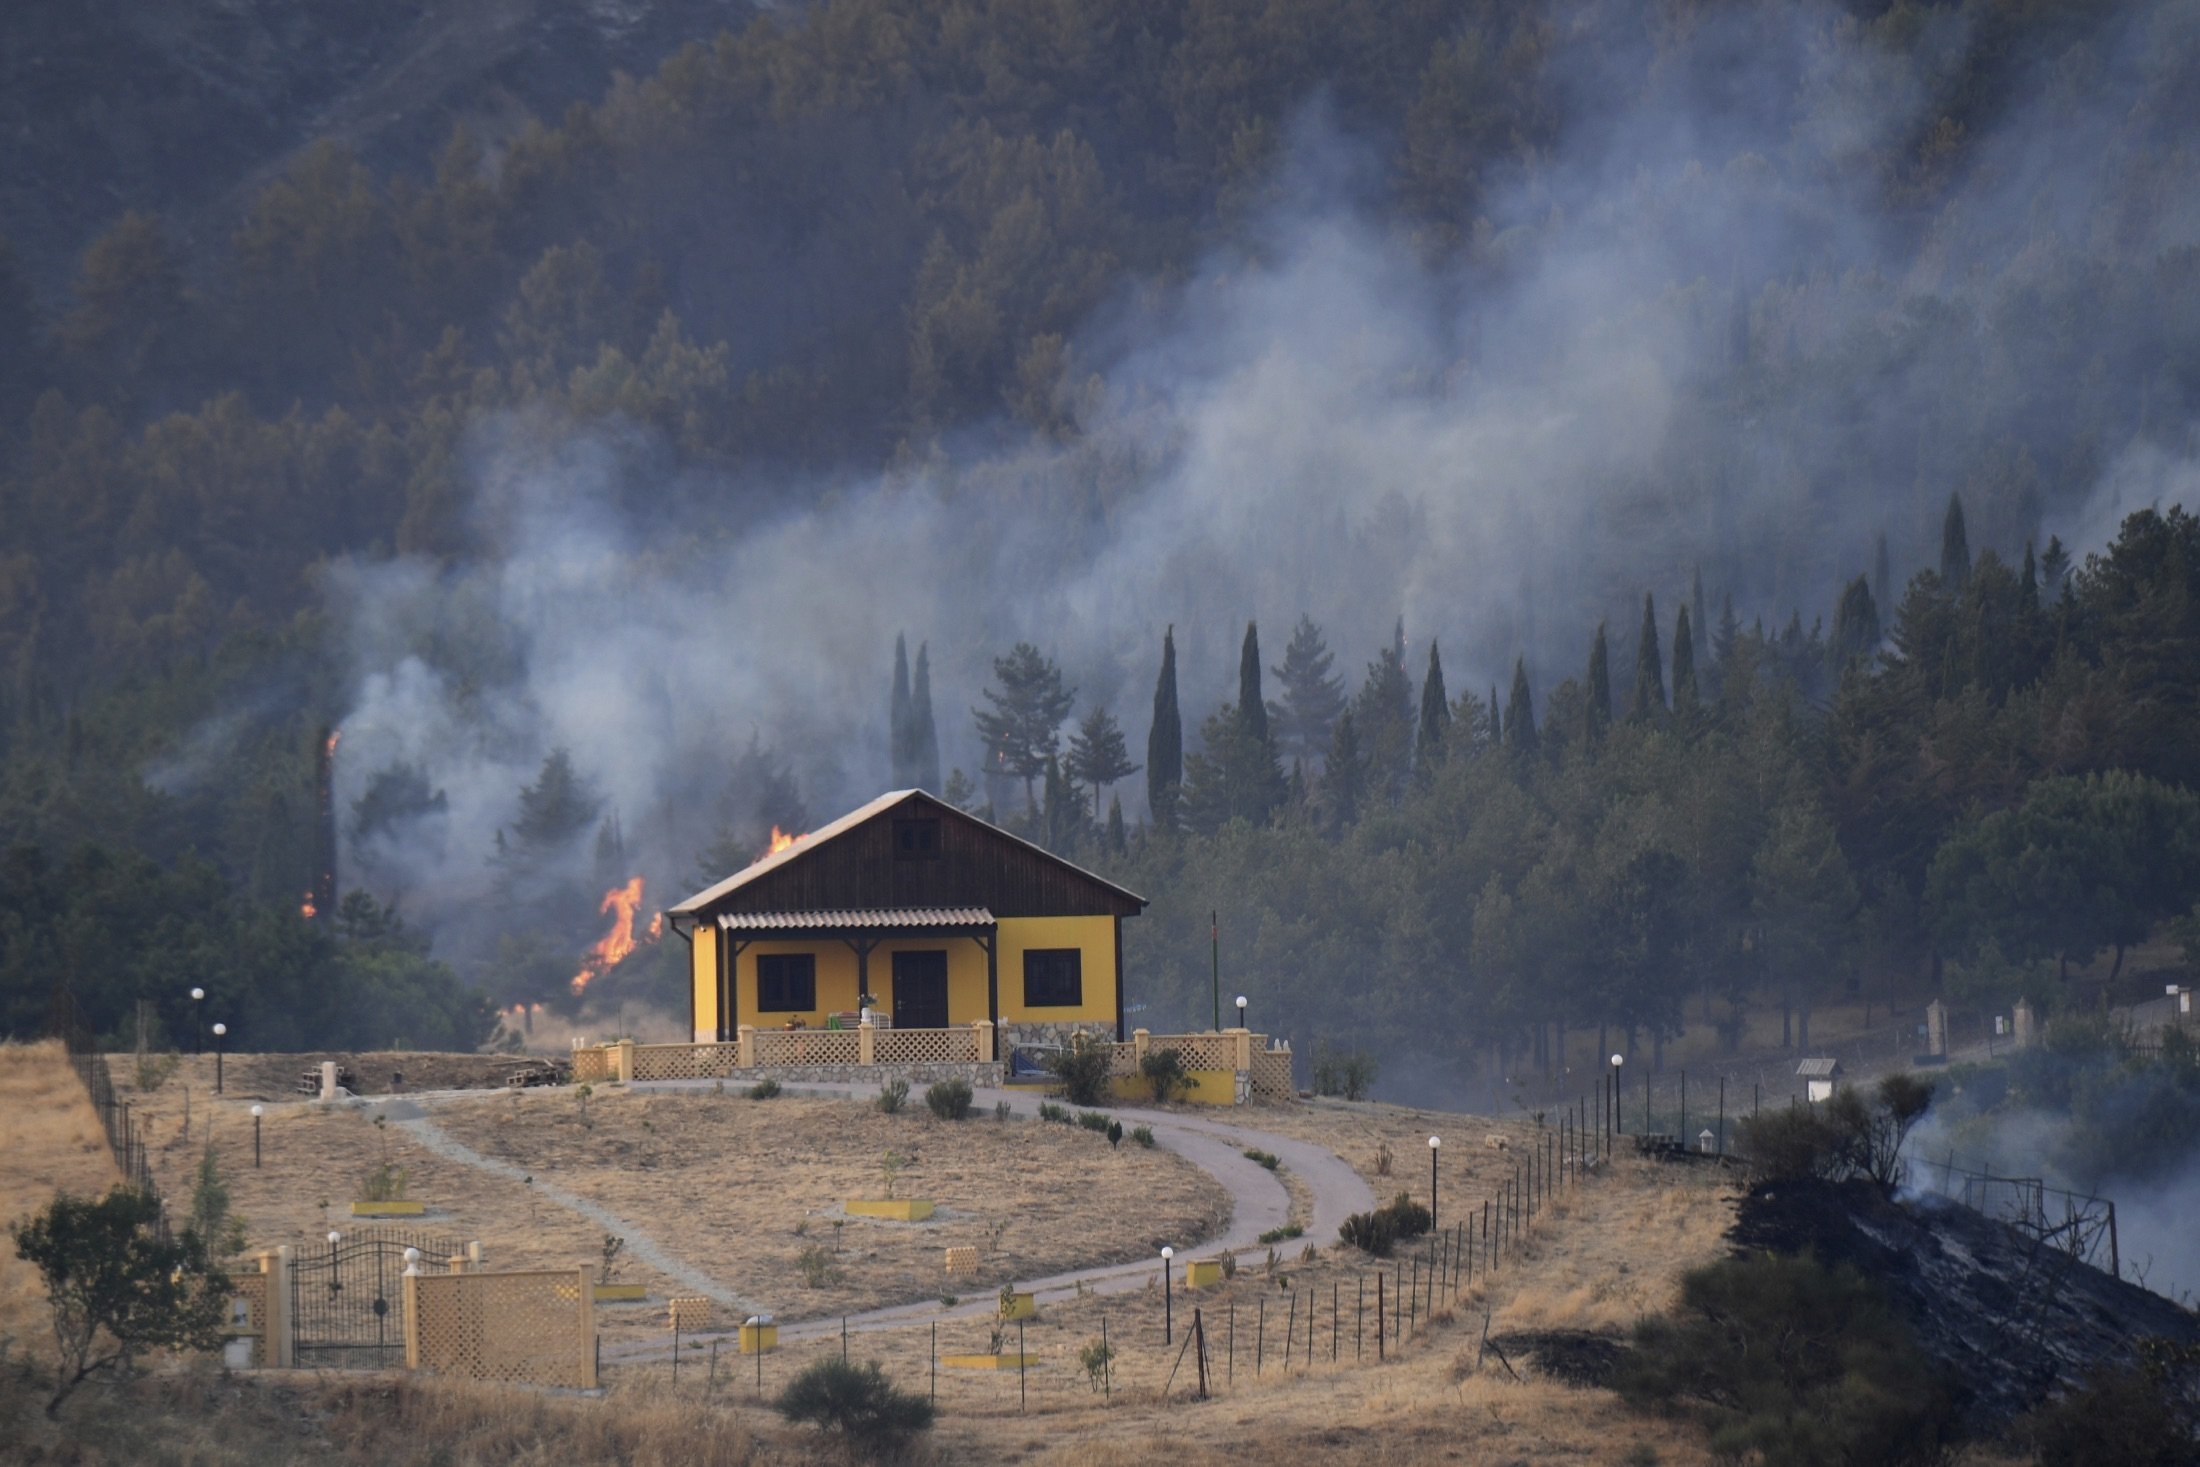 A Canadair drops water on a fire near Petralia Soprana in the upper Madonie as many wildfires continue plaguing the region, near Palermo, Sicily, Italy, Aug. 10, 2021. (AP Photo) 